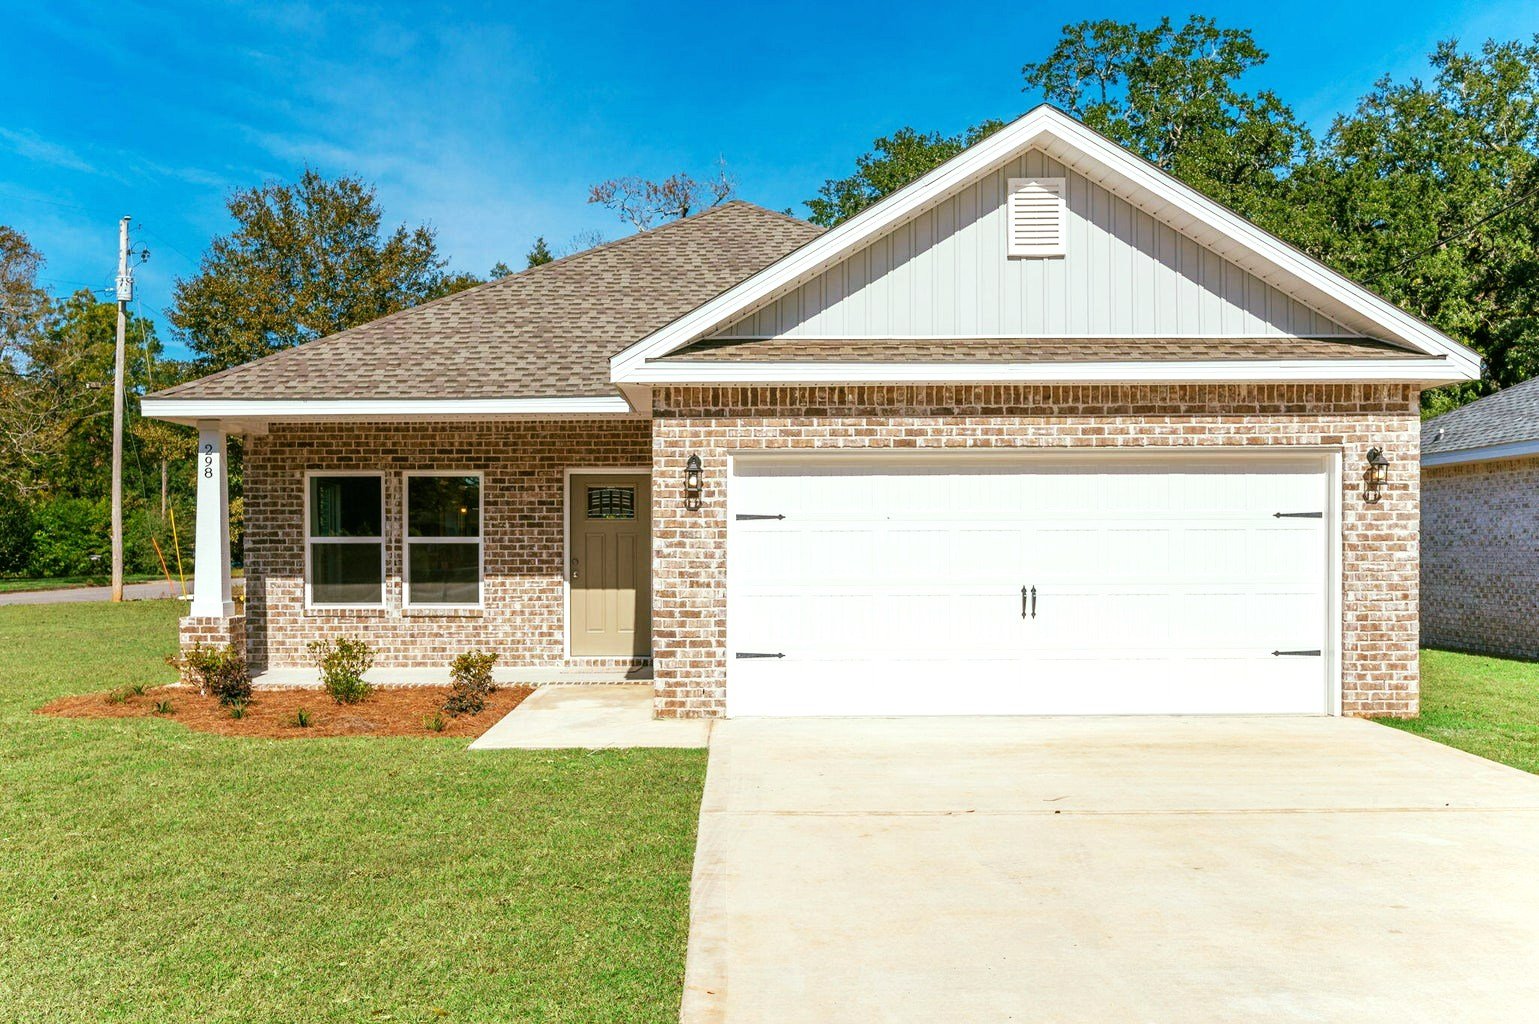 🚨 Under Contract Alert! 🚨

🏡 This charming Craftsman-style home is now pending!
📍 Address: 132 Sandhill Court, Freeport, FL 32439
🛏️ 3 Bedrooms
🛁 2 Bathrooms
📐 1,313 sqft
💰 Price: $319,000

Features:
- All brick construction with raised ceili